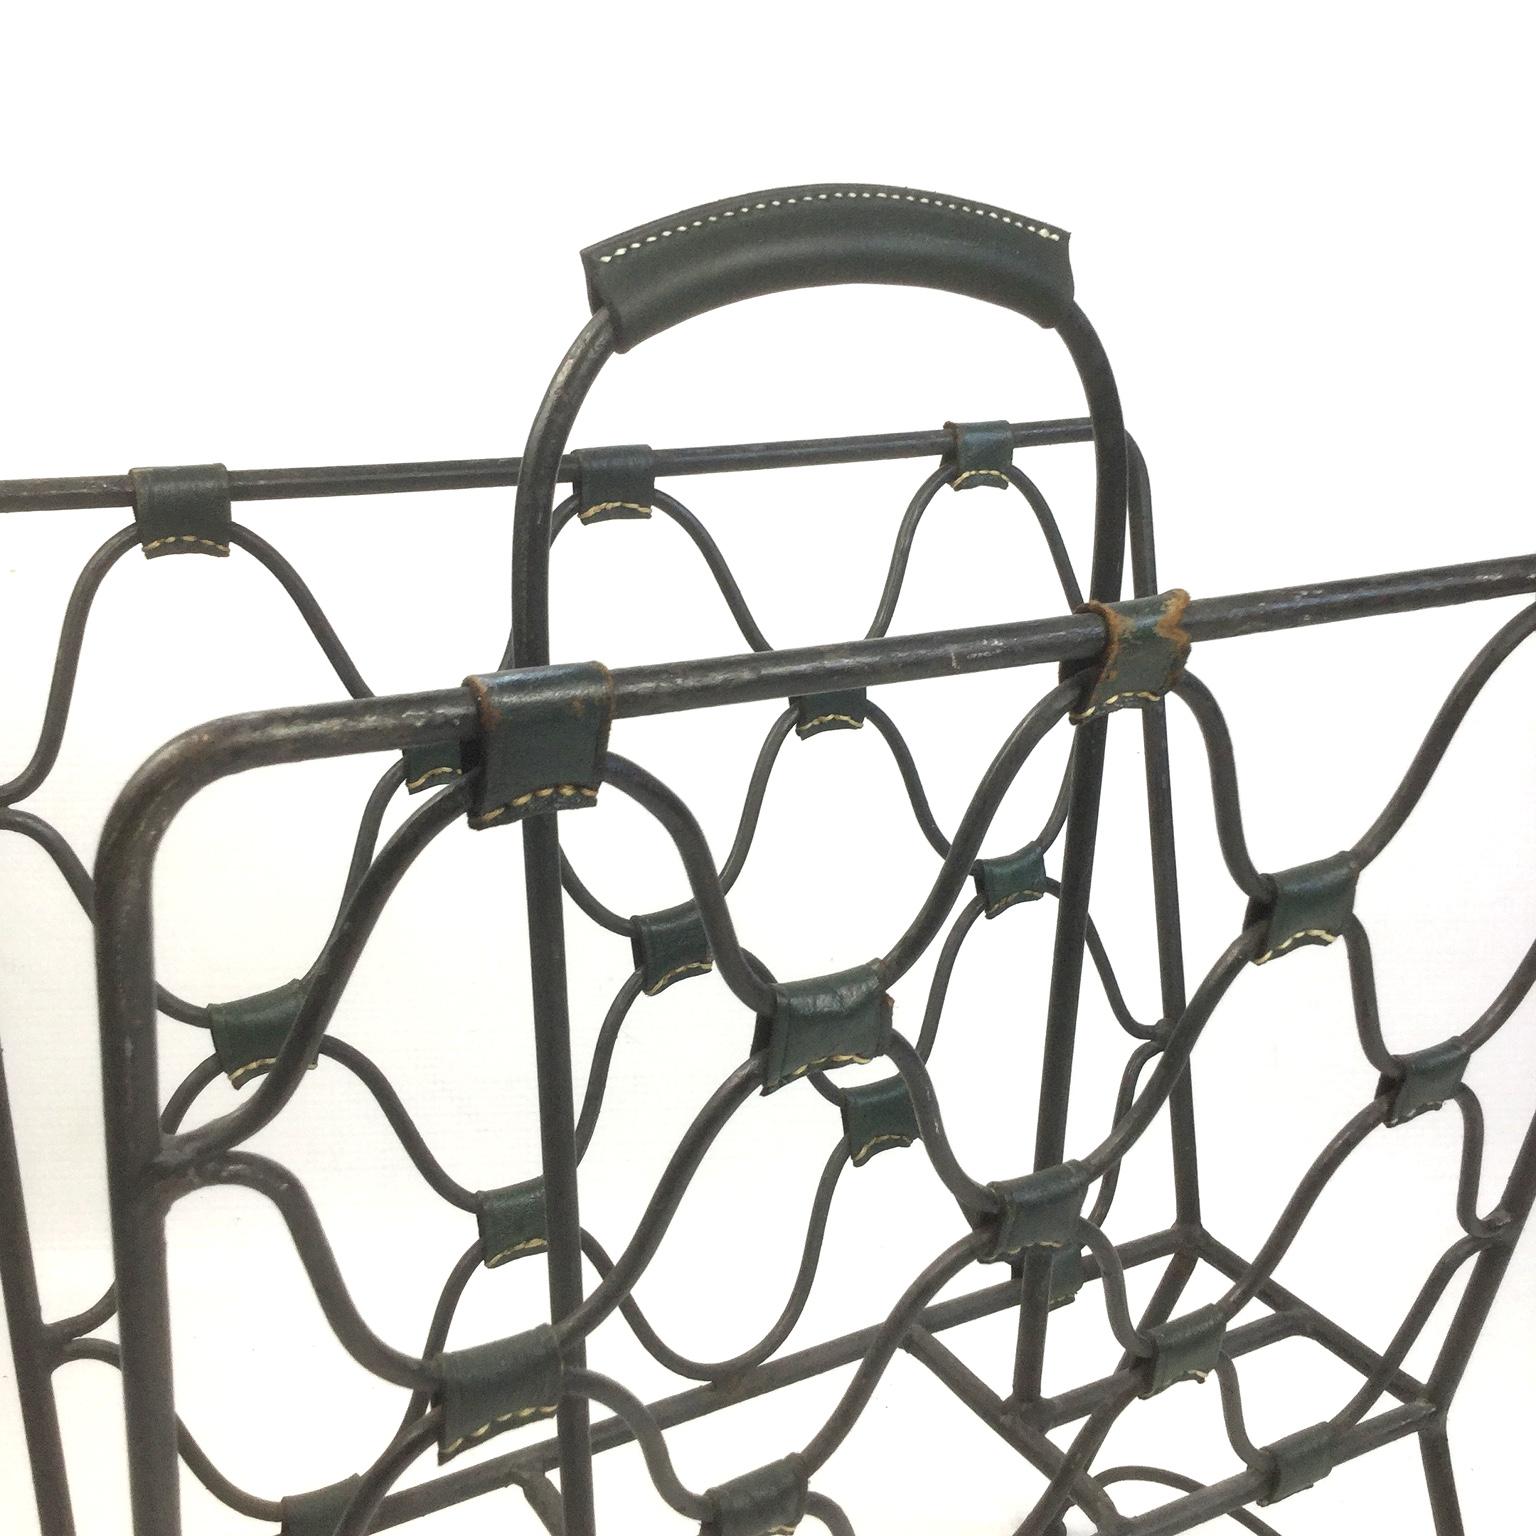 Hand-Crafted Jacques Adnet Magazine Rack in Wrought Iron and Green Leather from the 1940s For Sale